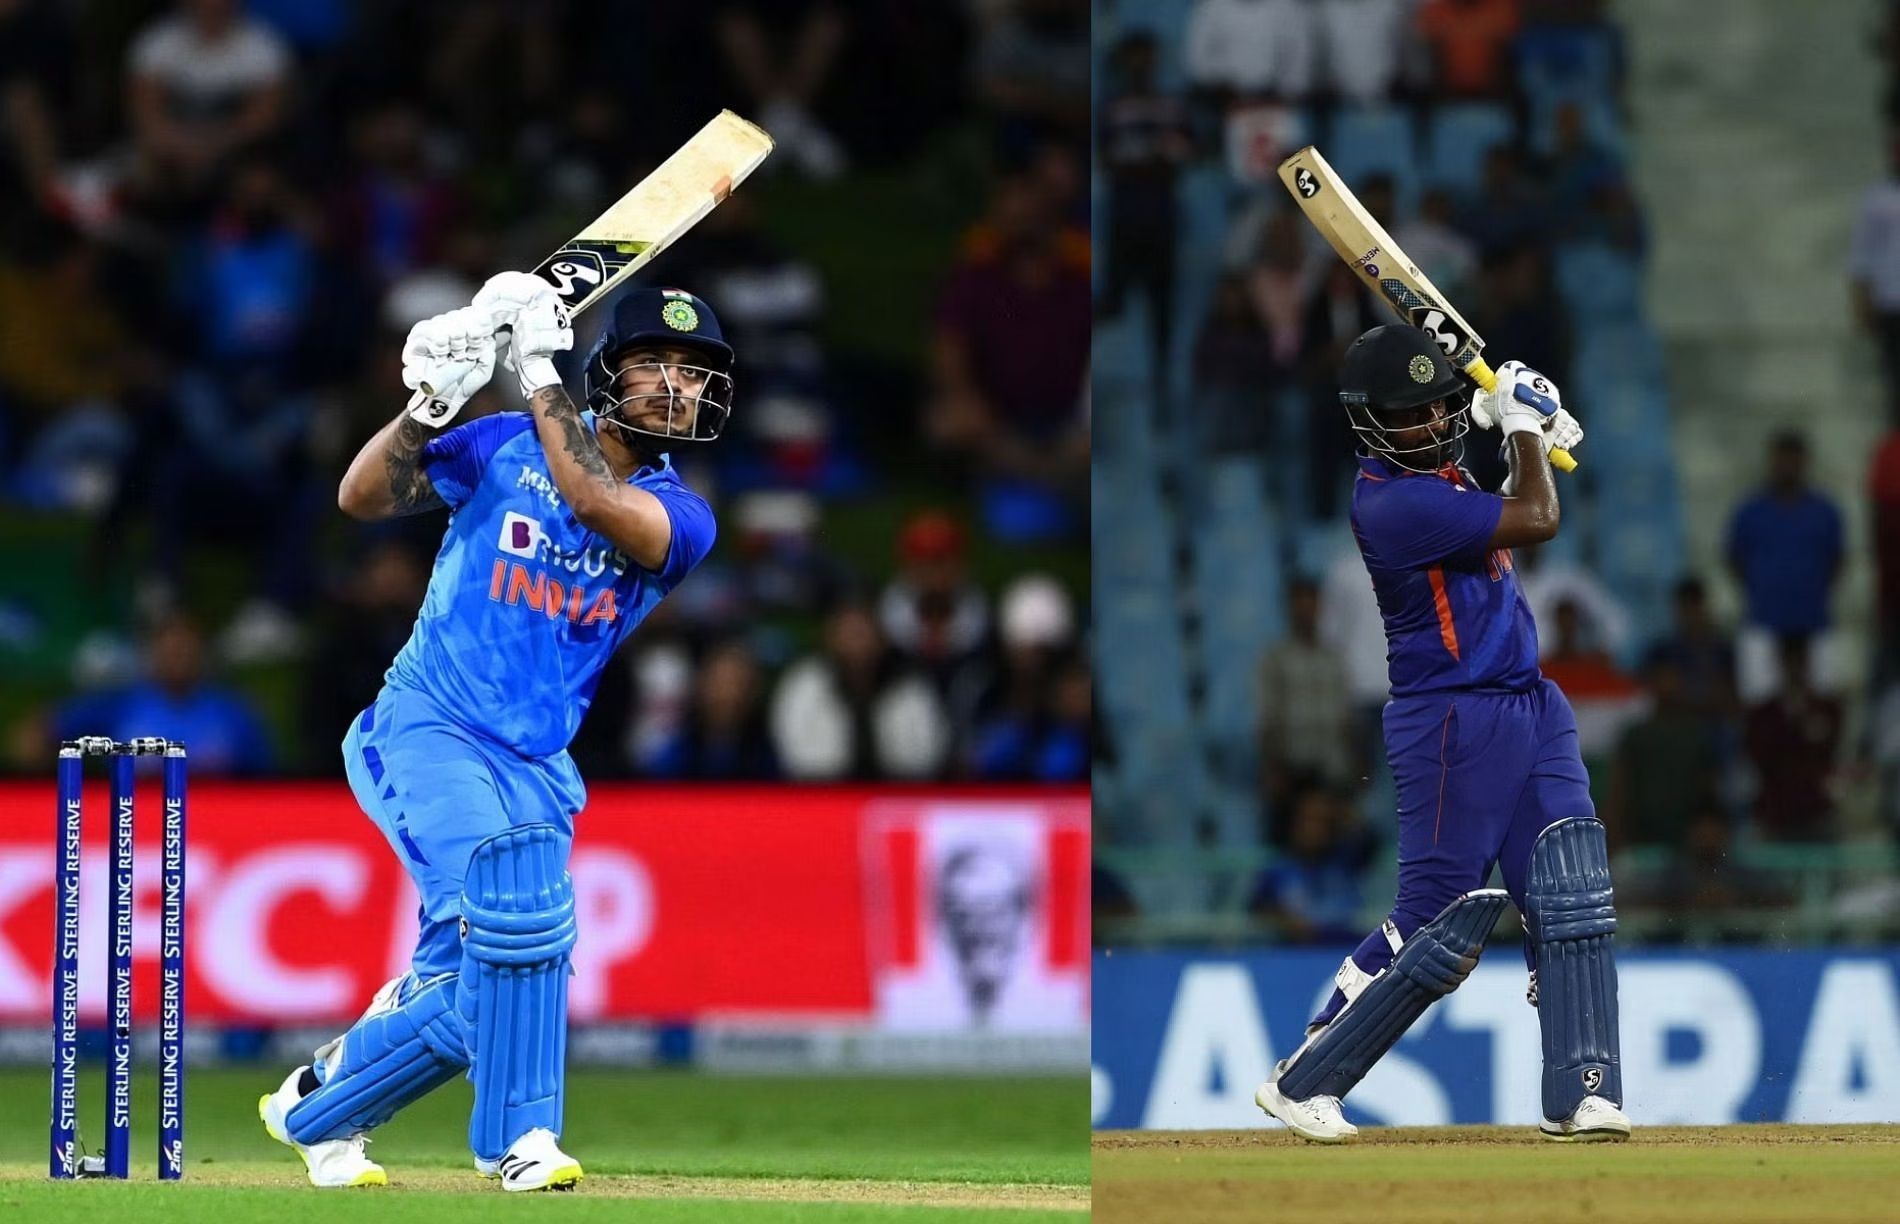 Ishan Kishan and Sanju Samson were the two wicketkeeper-batters on the West Indies tour.